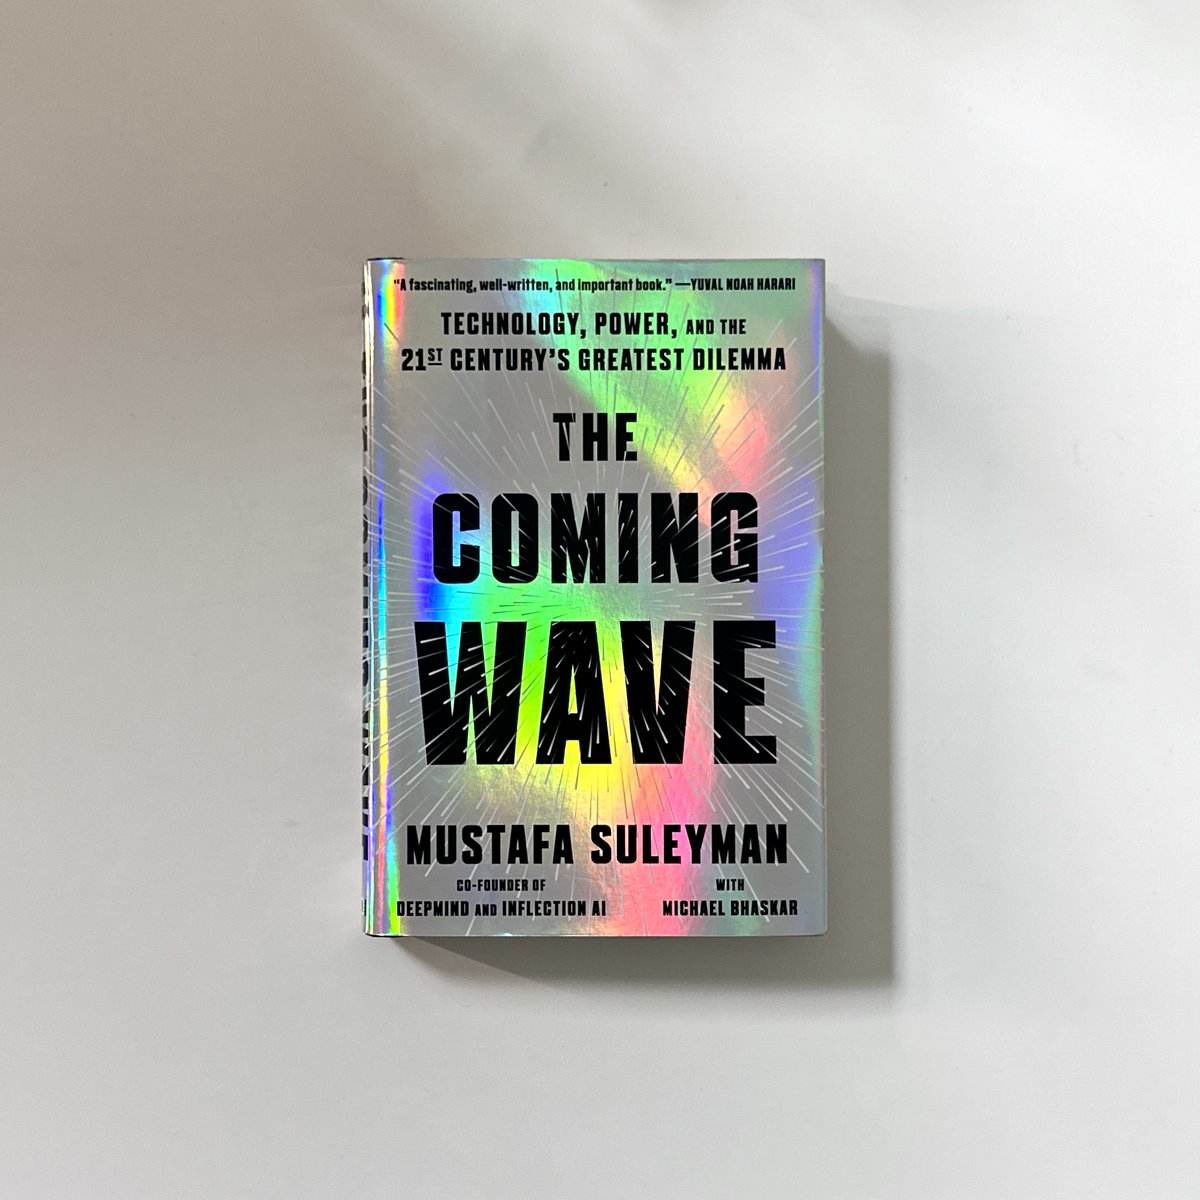 “A heartfelt and candid exploration of what the future may hold for us' — The Guardian THE COMING WAVE by @mustafasuleyman explores the future of AI and what it means for our world. Learn more at the link. penguinrandomhouse.com/books/722674/t…